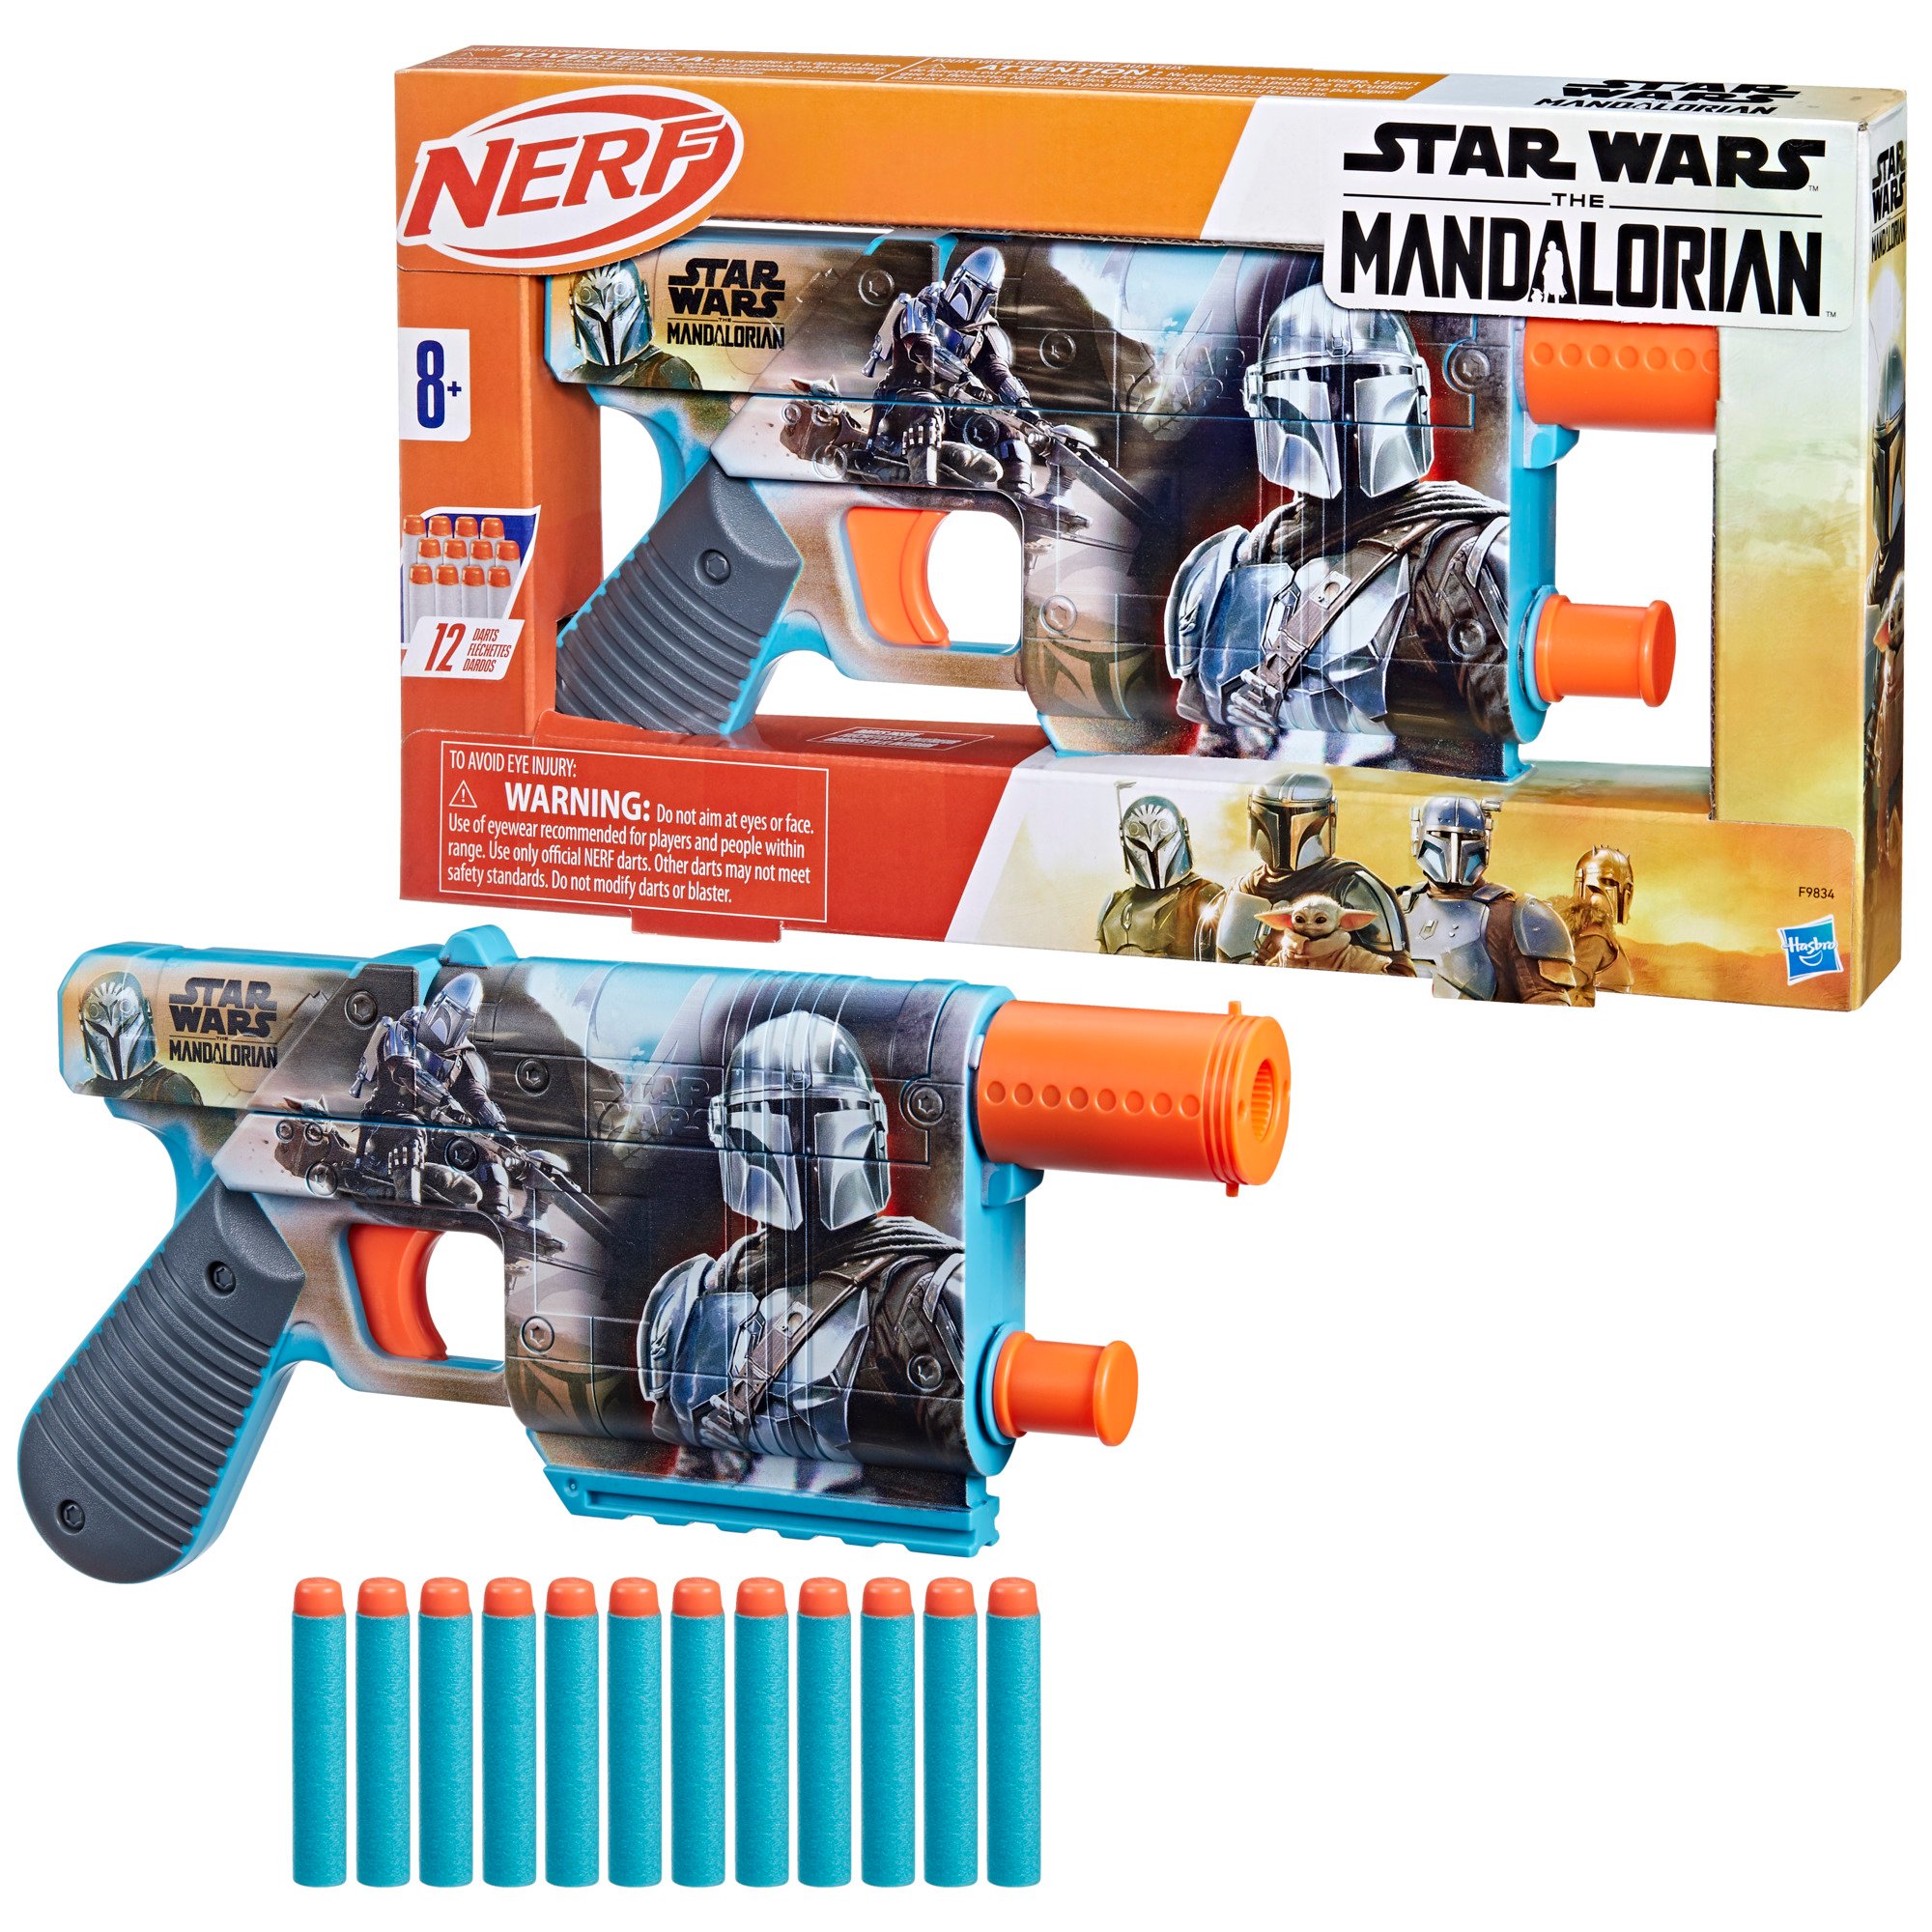 Recently Hasbro released some new images of Nerf Mania, their Nerf